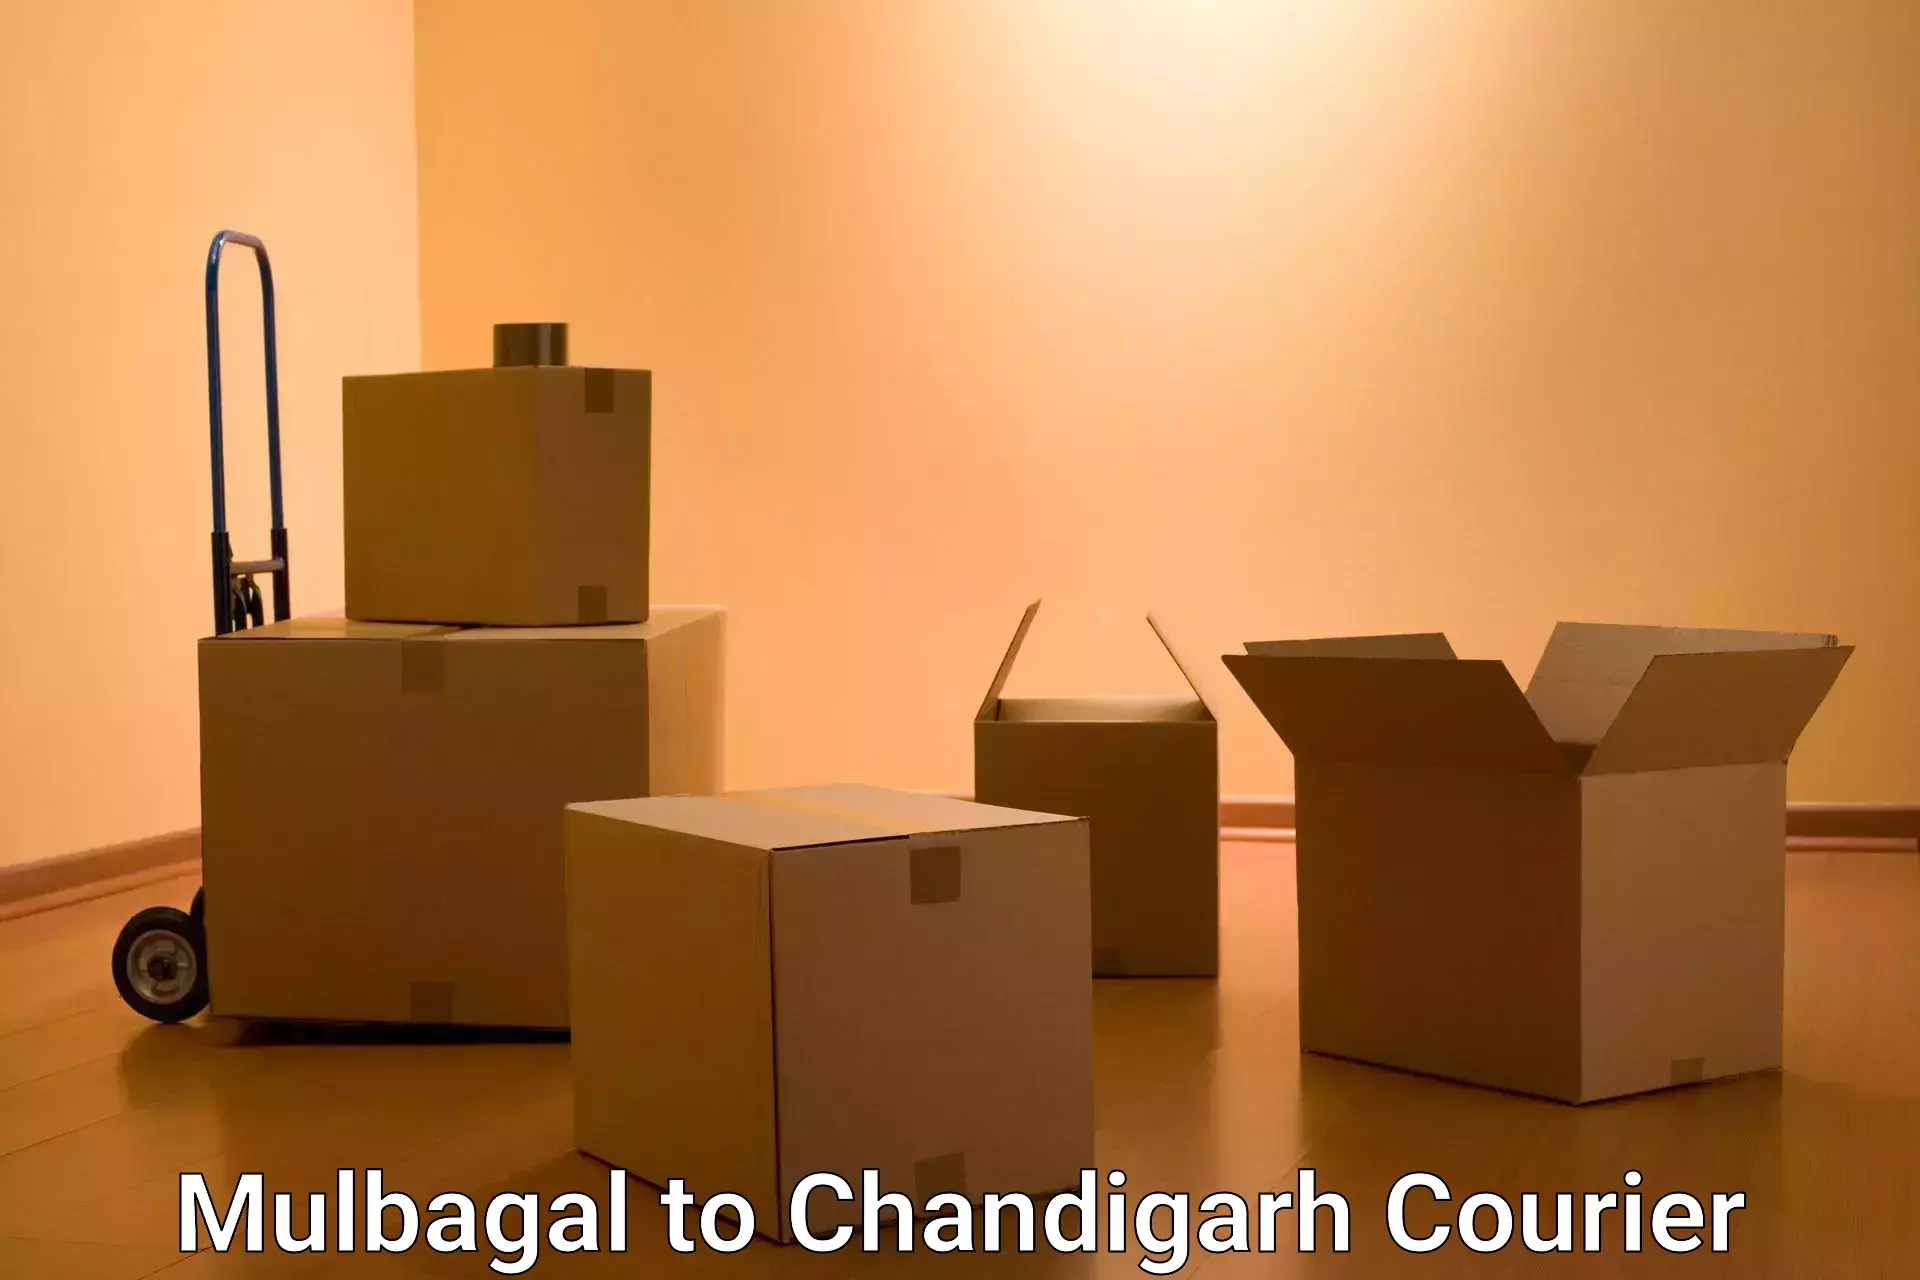 Express mail service Mulbagal to Chandigarh